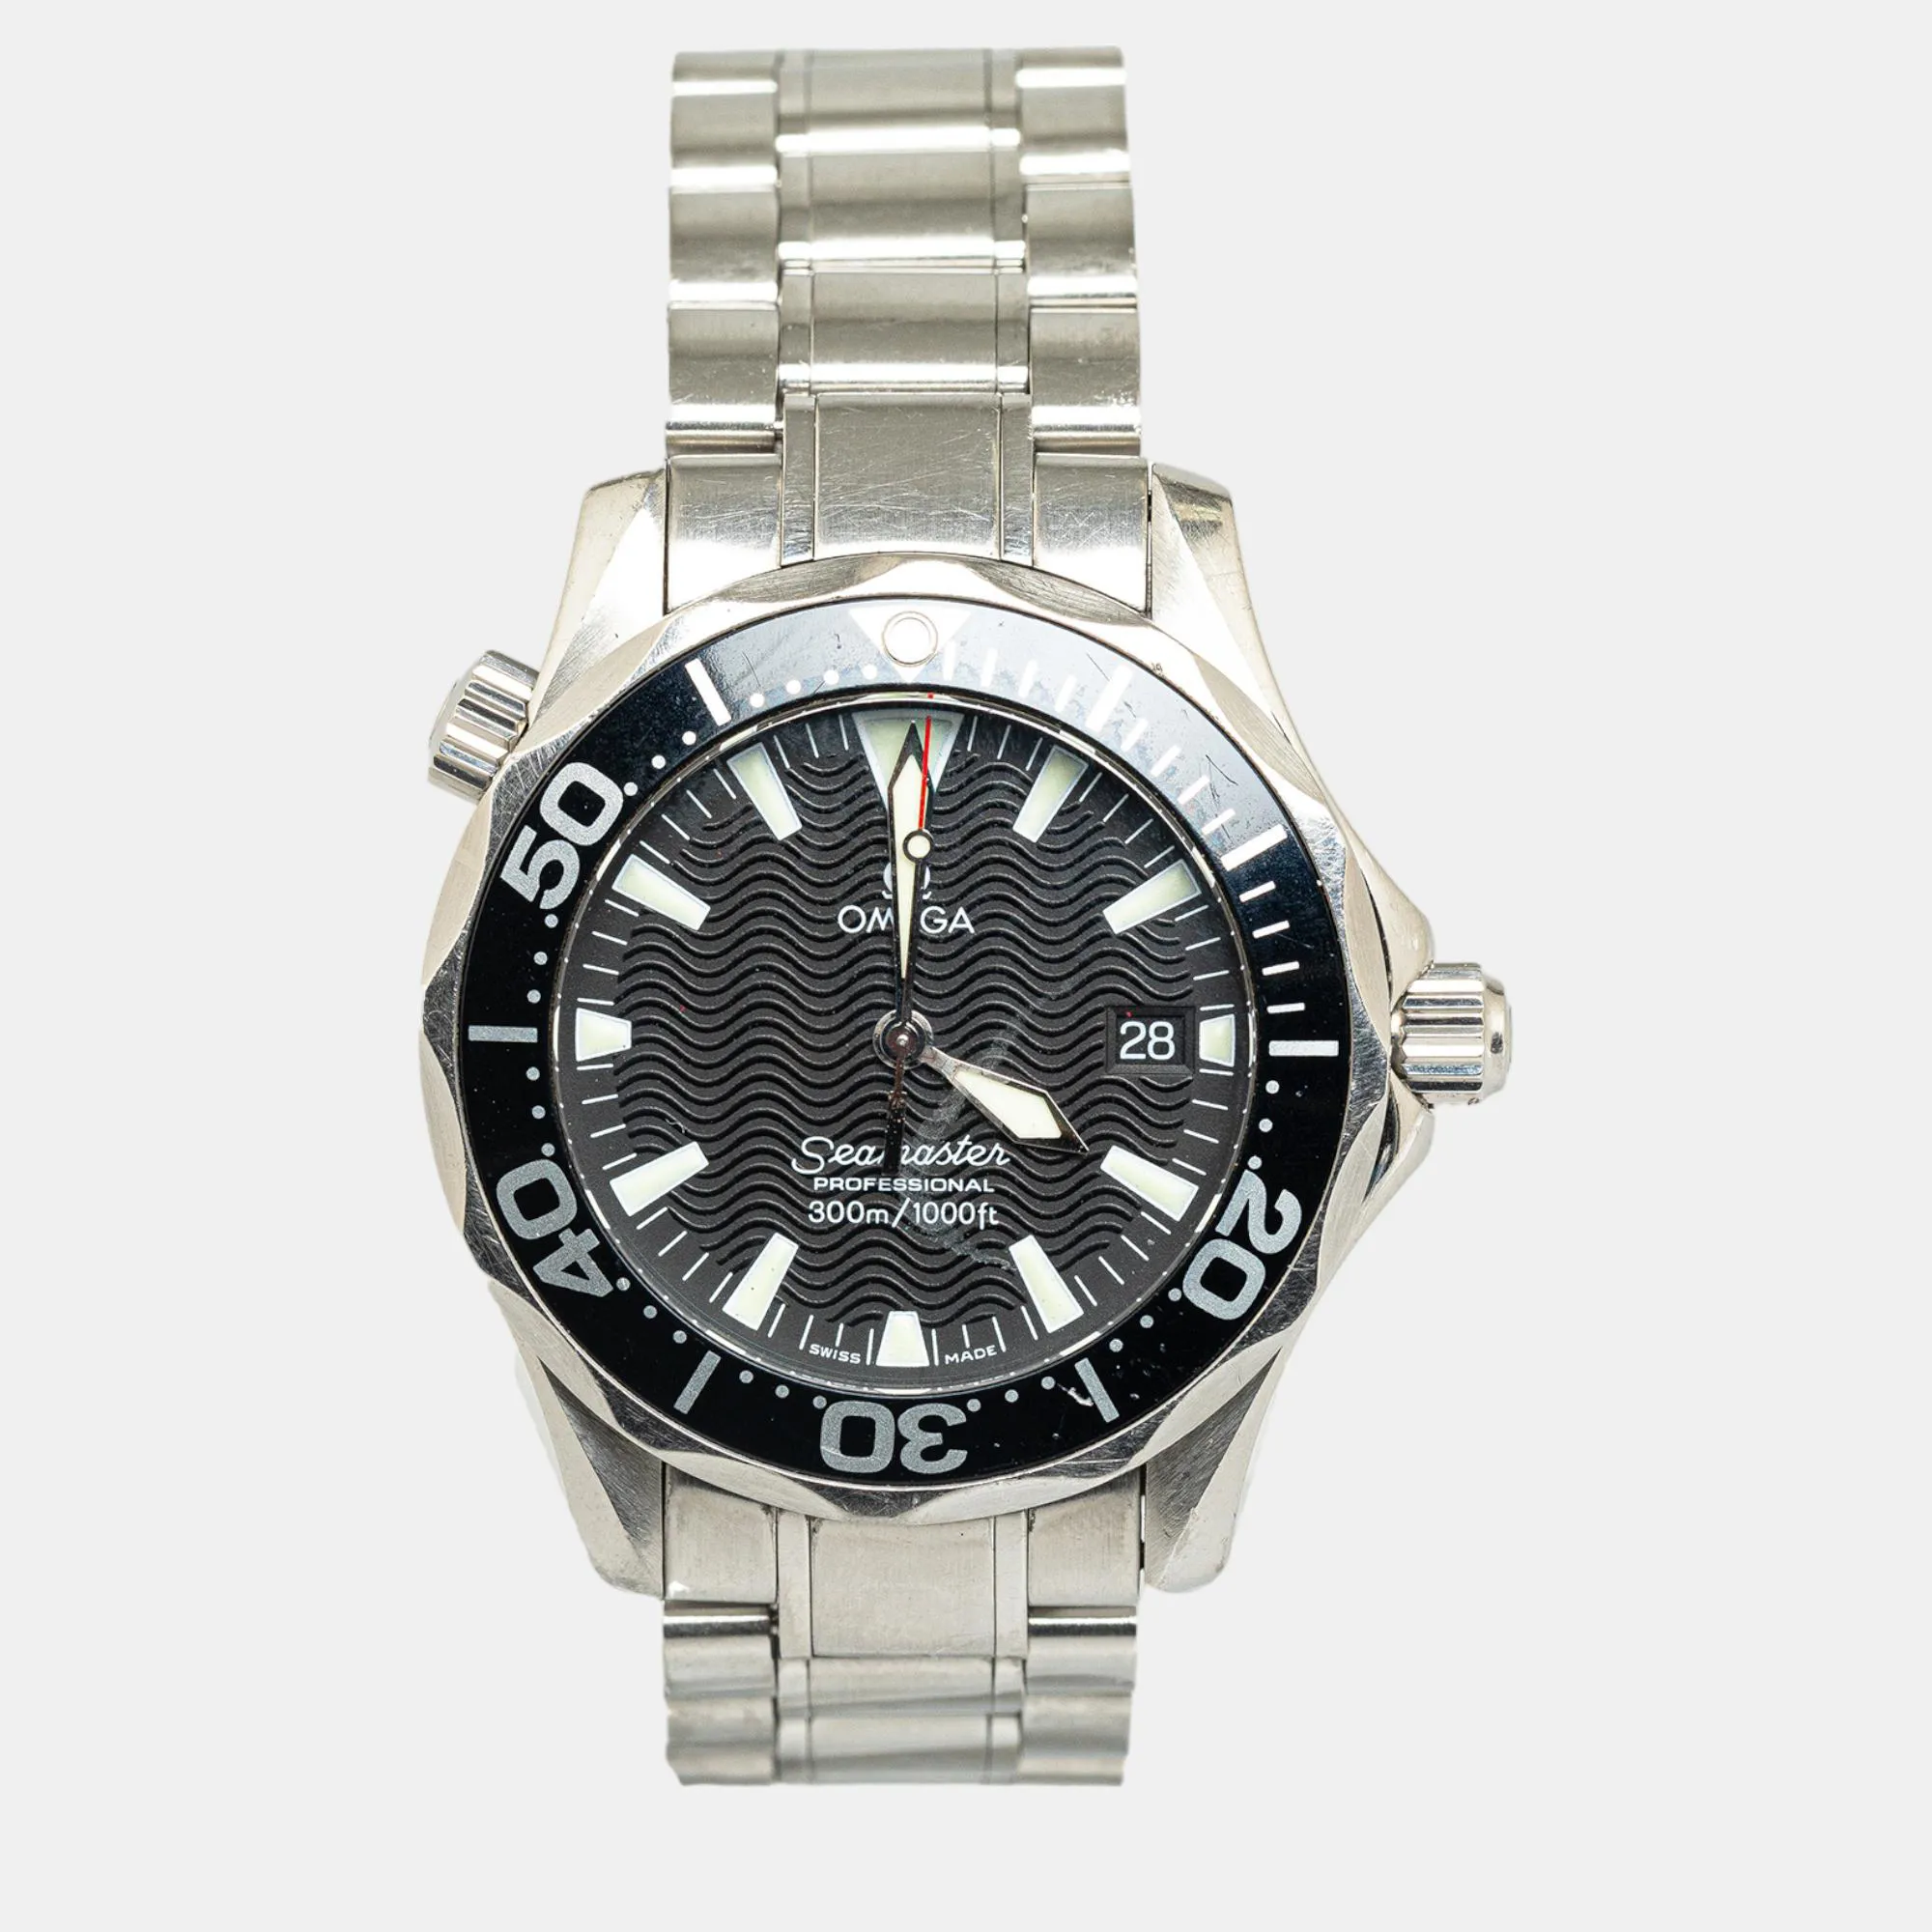 Omega Seamaster Professional nullmm Stainless steel